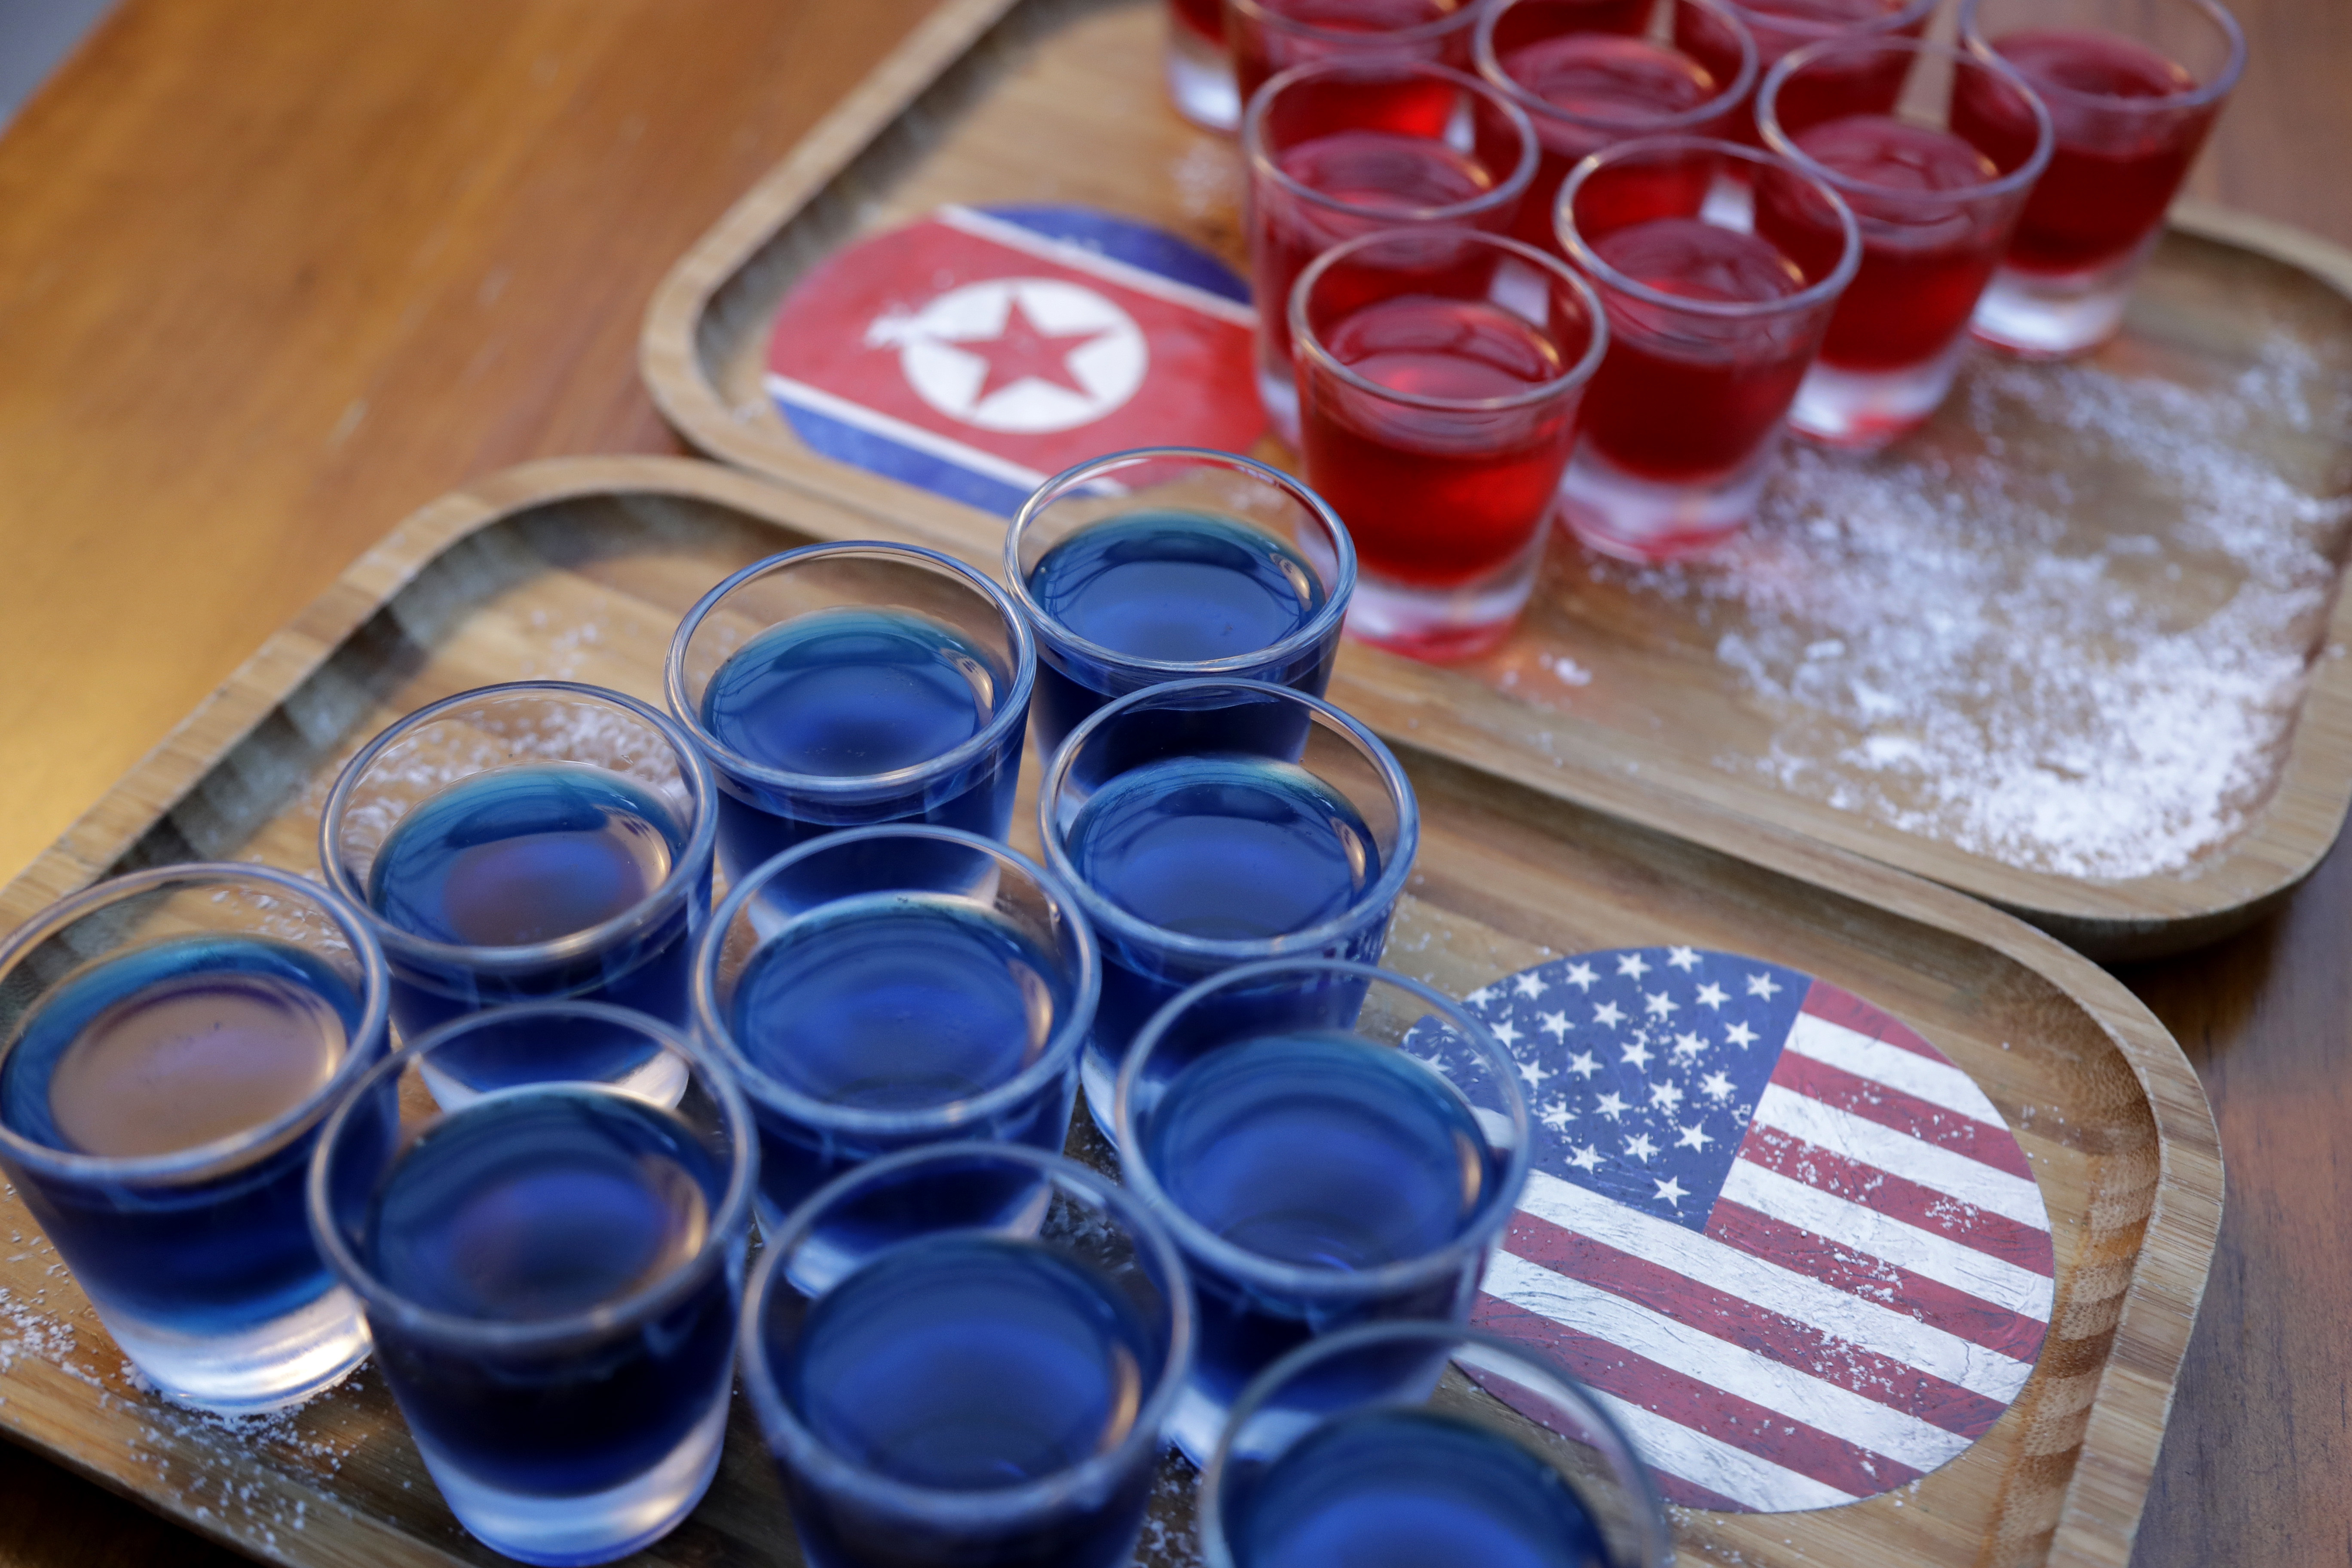 In this June 7, 2018, photo, alcoholic drinks inspired by the upcoming summit between U.S. President Donald Trump and North Korean leader Kim Jong Un is displayed at a local bar, the Escobar, in Singapore. Singapore is a city that takes great pride in its food, so it’s not surprising that enterprising restaurateurs are using next week’s historic summit between U.S. President Donald Trump and North Korean leader Kim Jong Un to showcase some culinary creativity. Restaurants are marking the city-state’s time in the global spotlight with everything from red, white and blue cocktails to tacos named after the two leaders.  (AP Photo/Wong Maye-E)